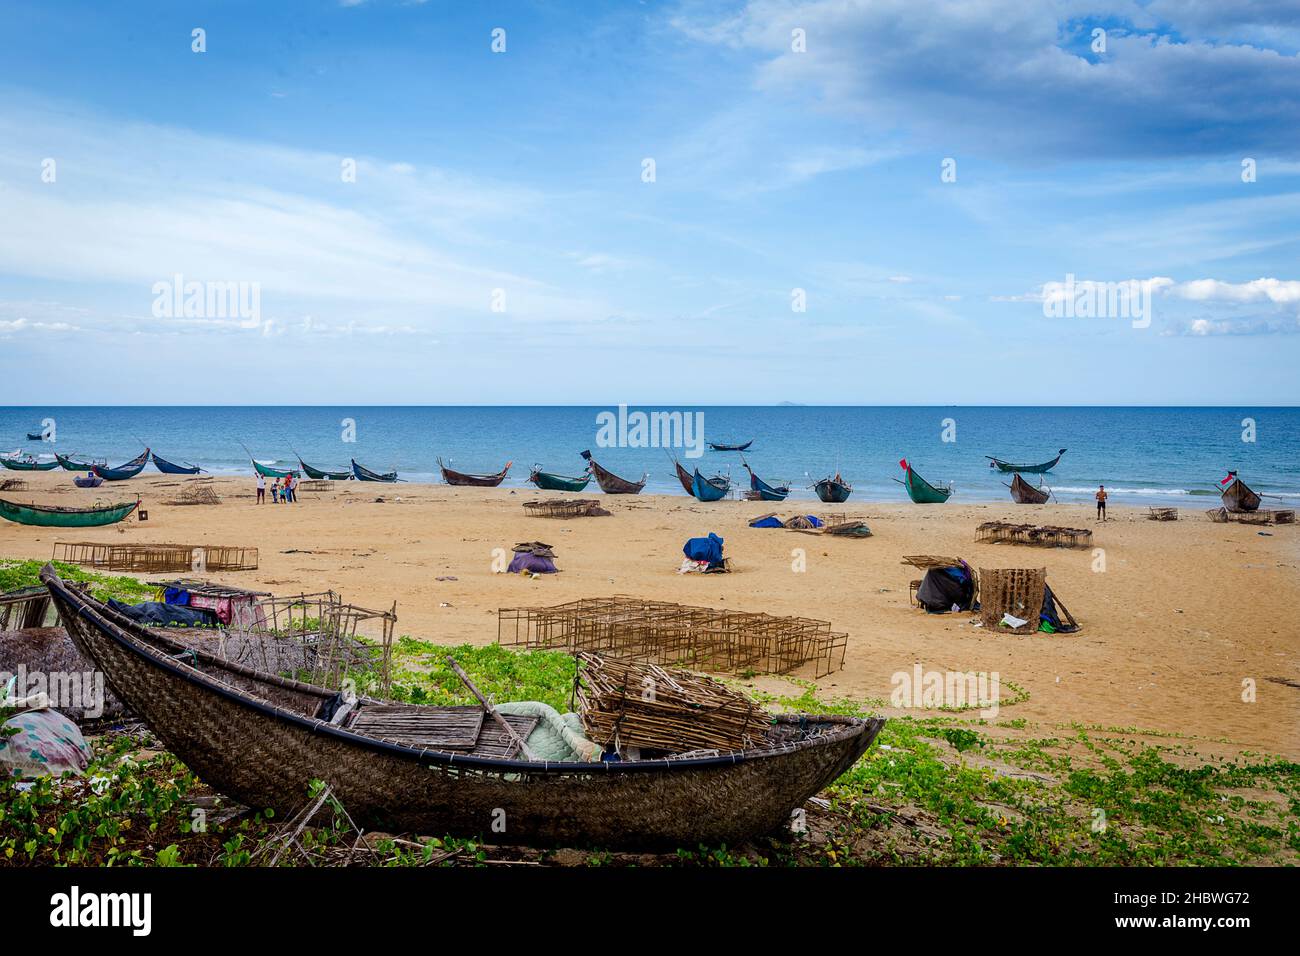 Basket Fishing Boats lined up on the beach in the morning after fishing at night. Stock Photo